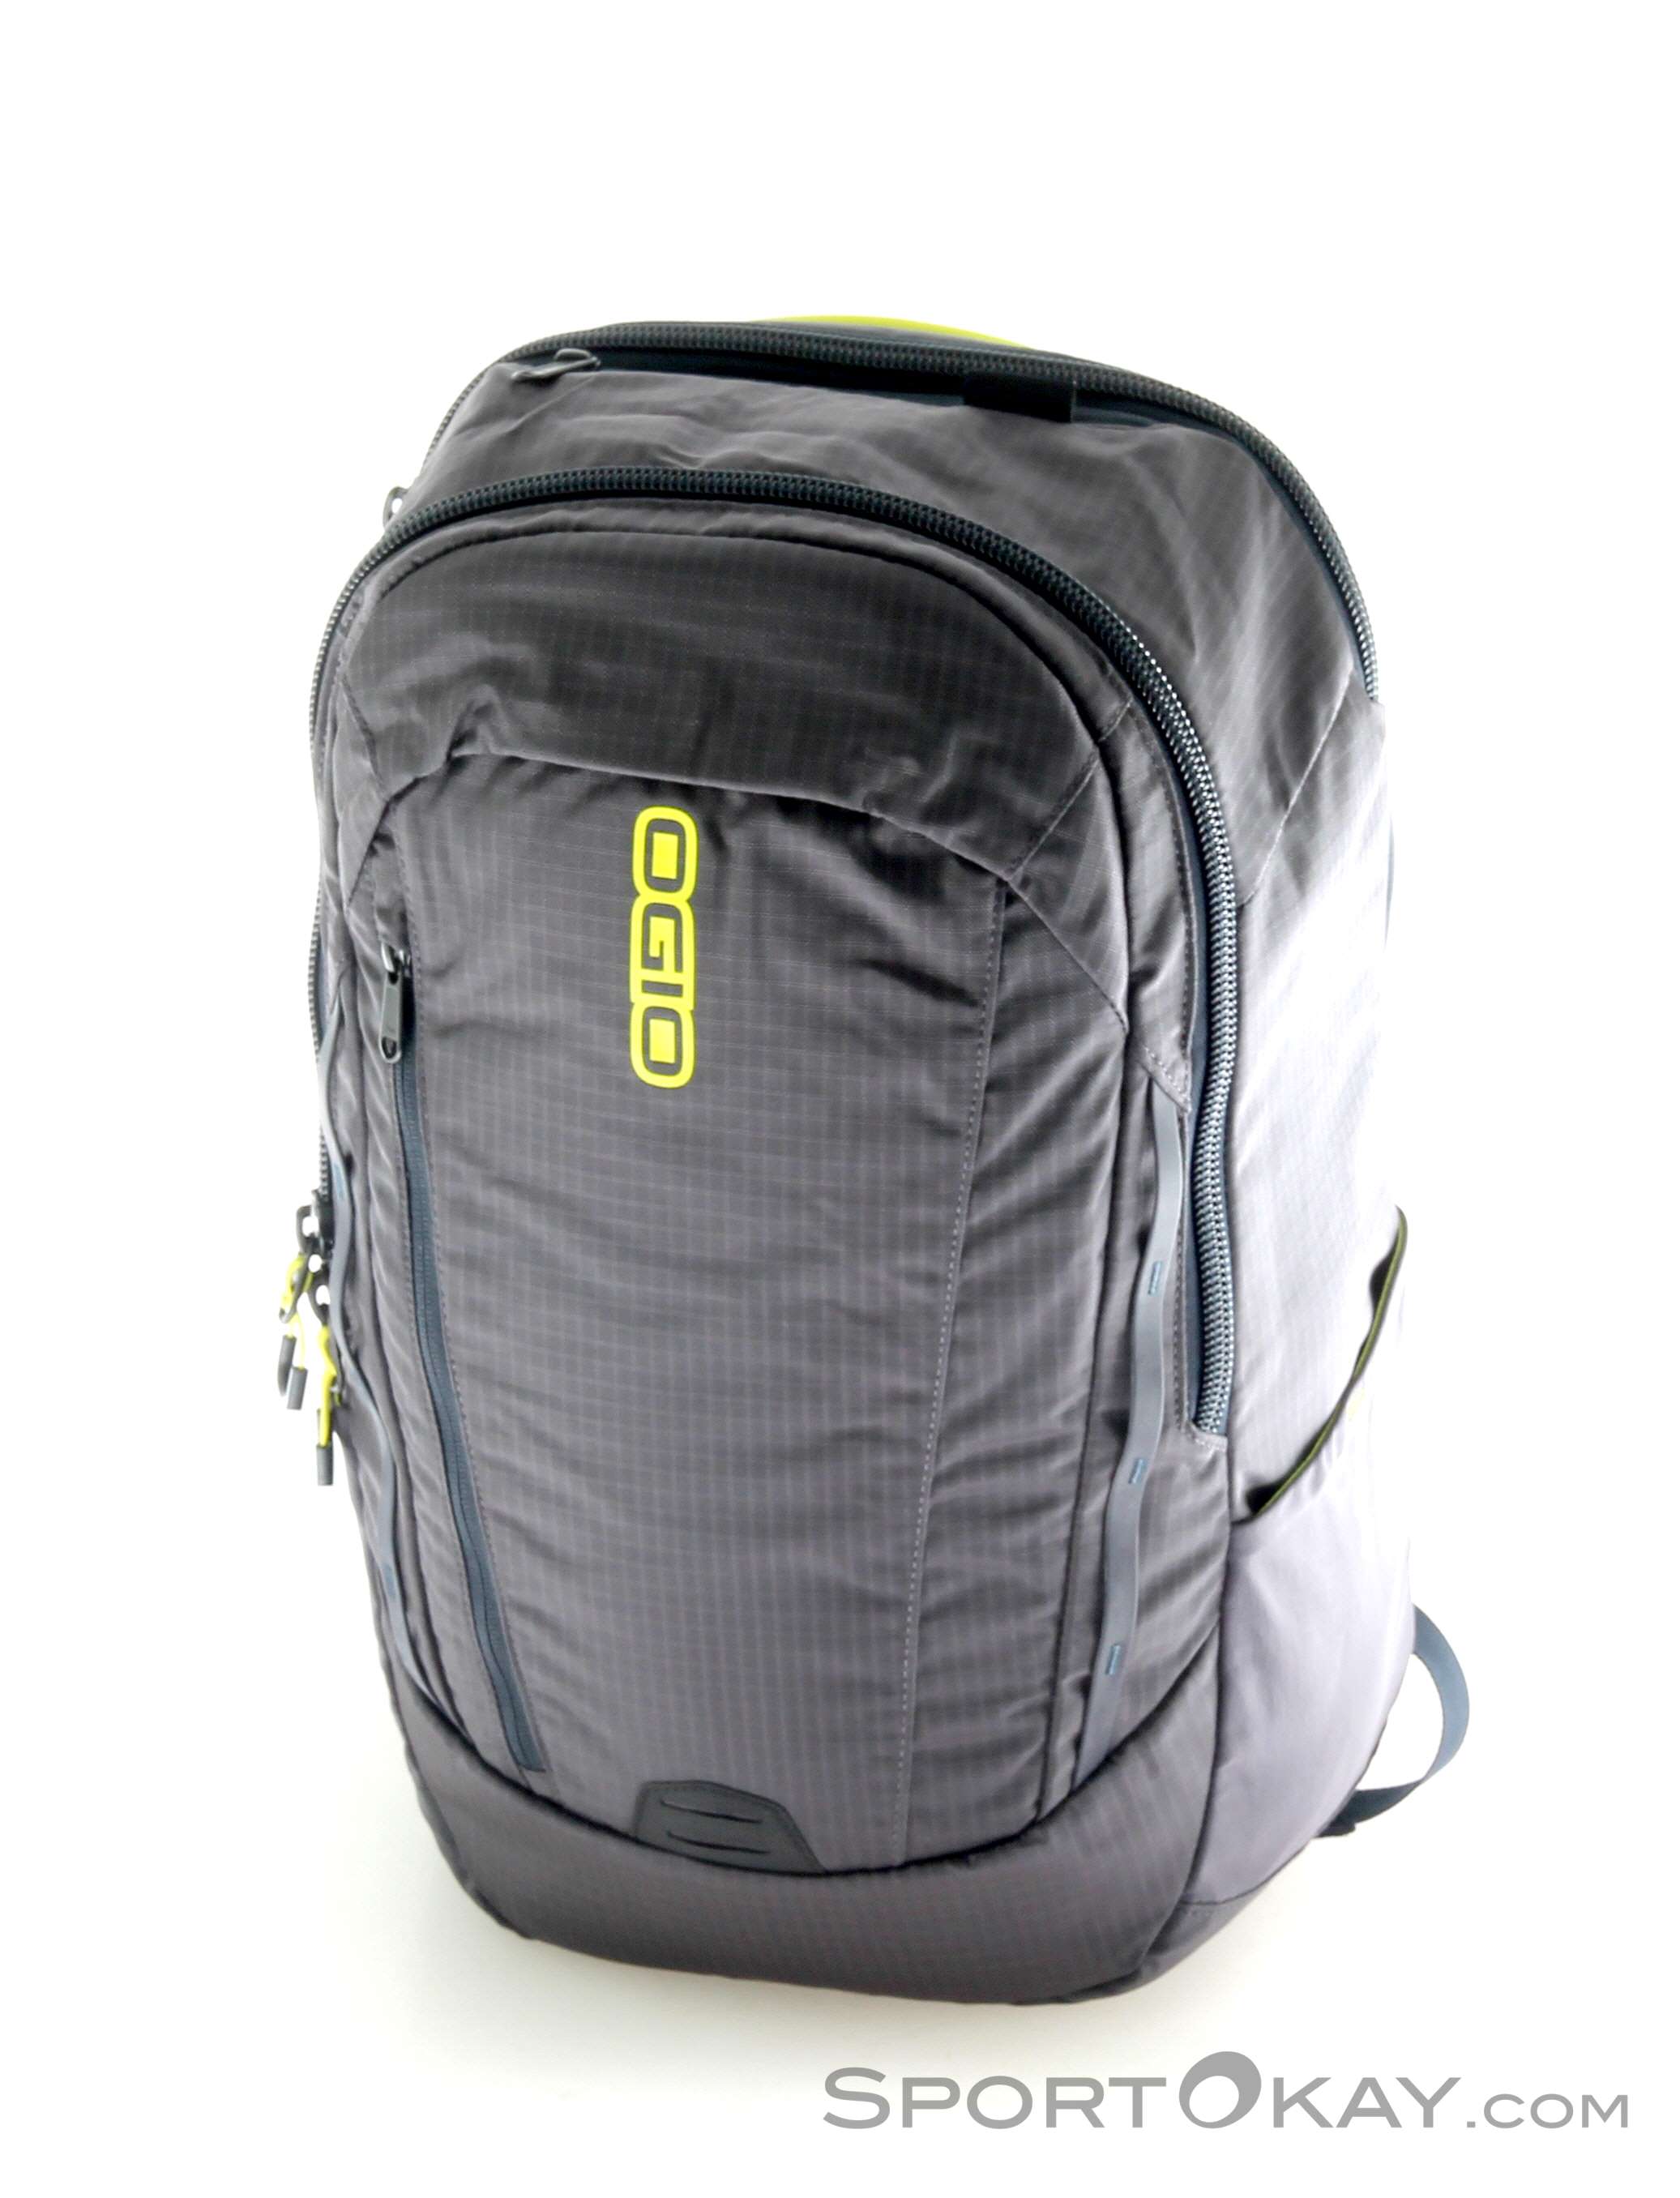 Ogio Apollo 20l Backpack - Bags - Leisure Bags - Fashion - All